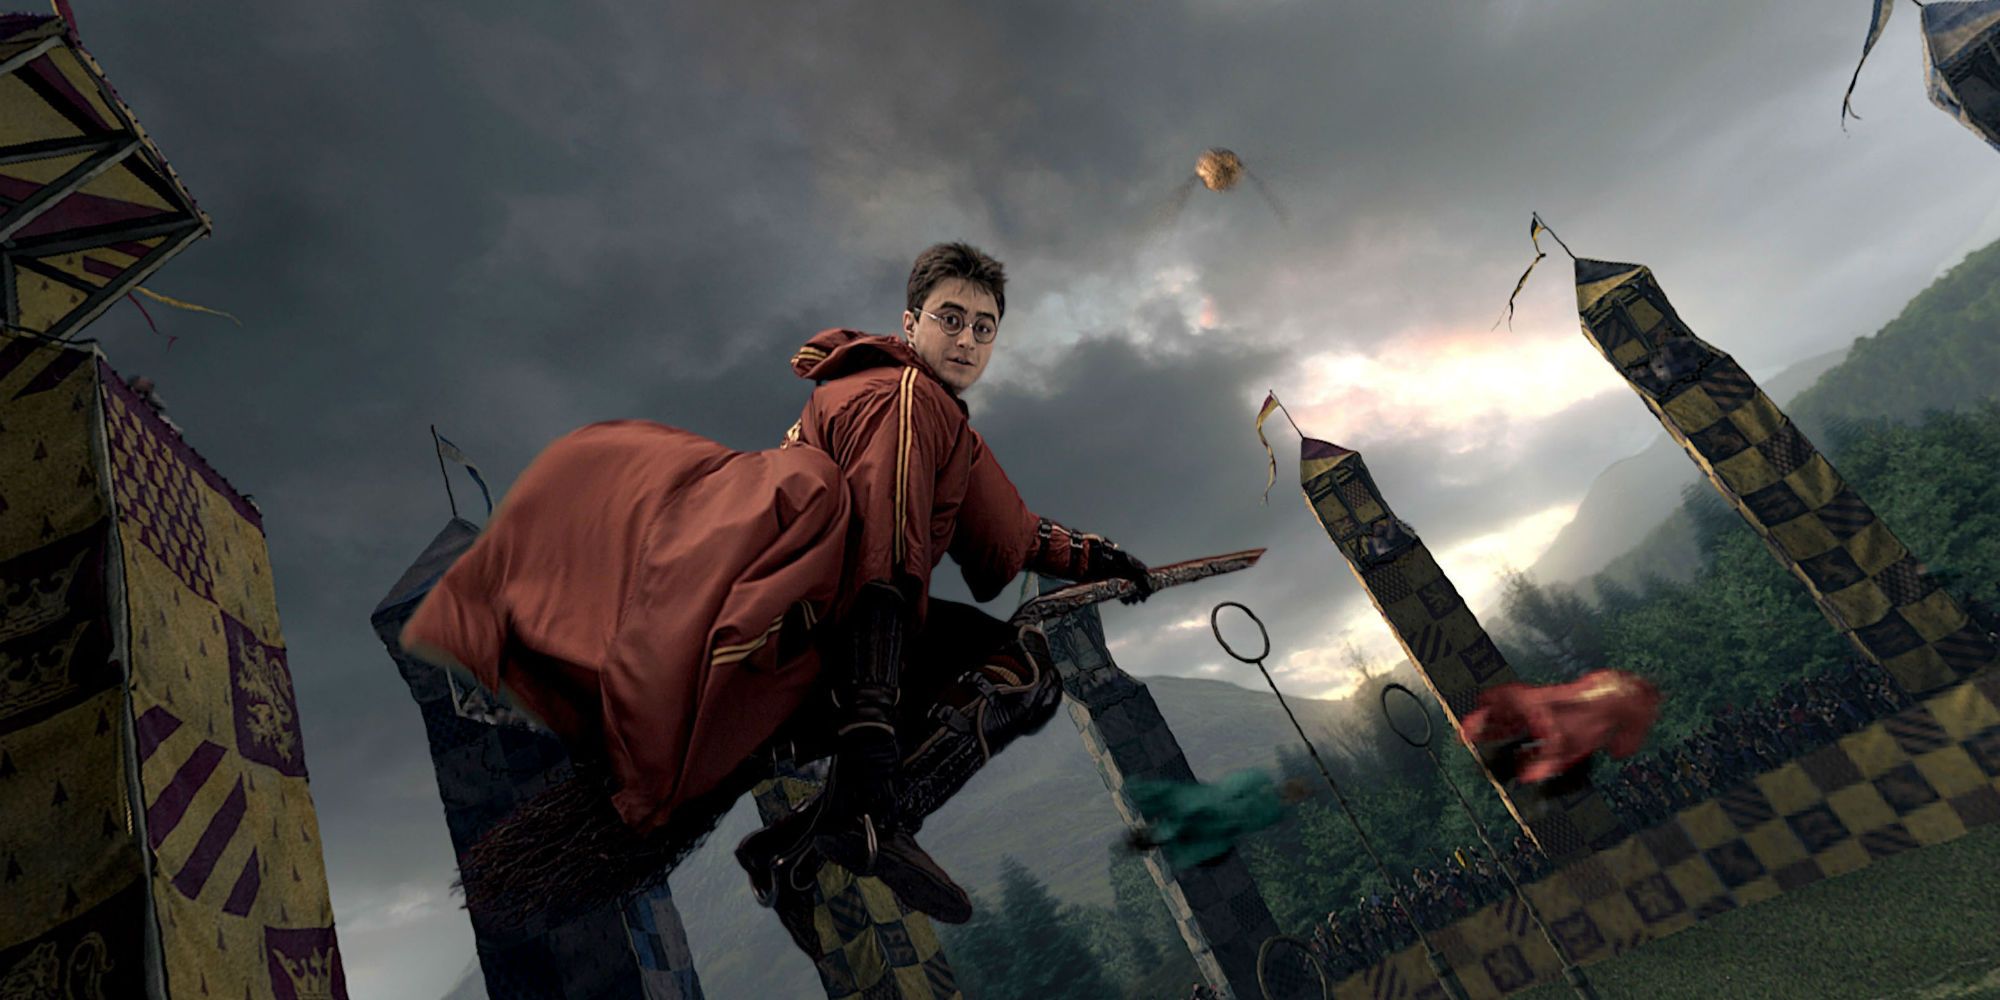 Harry Potter plays Quidditch